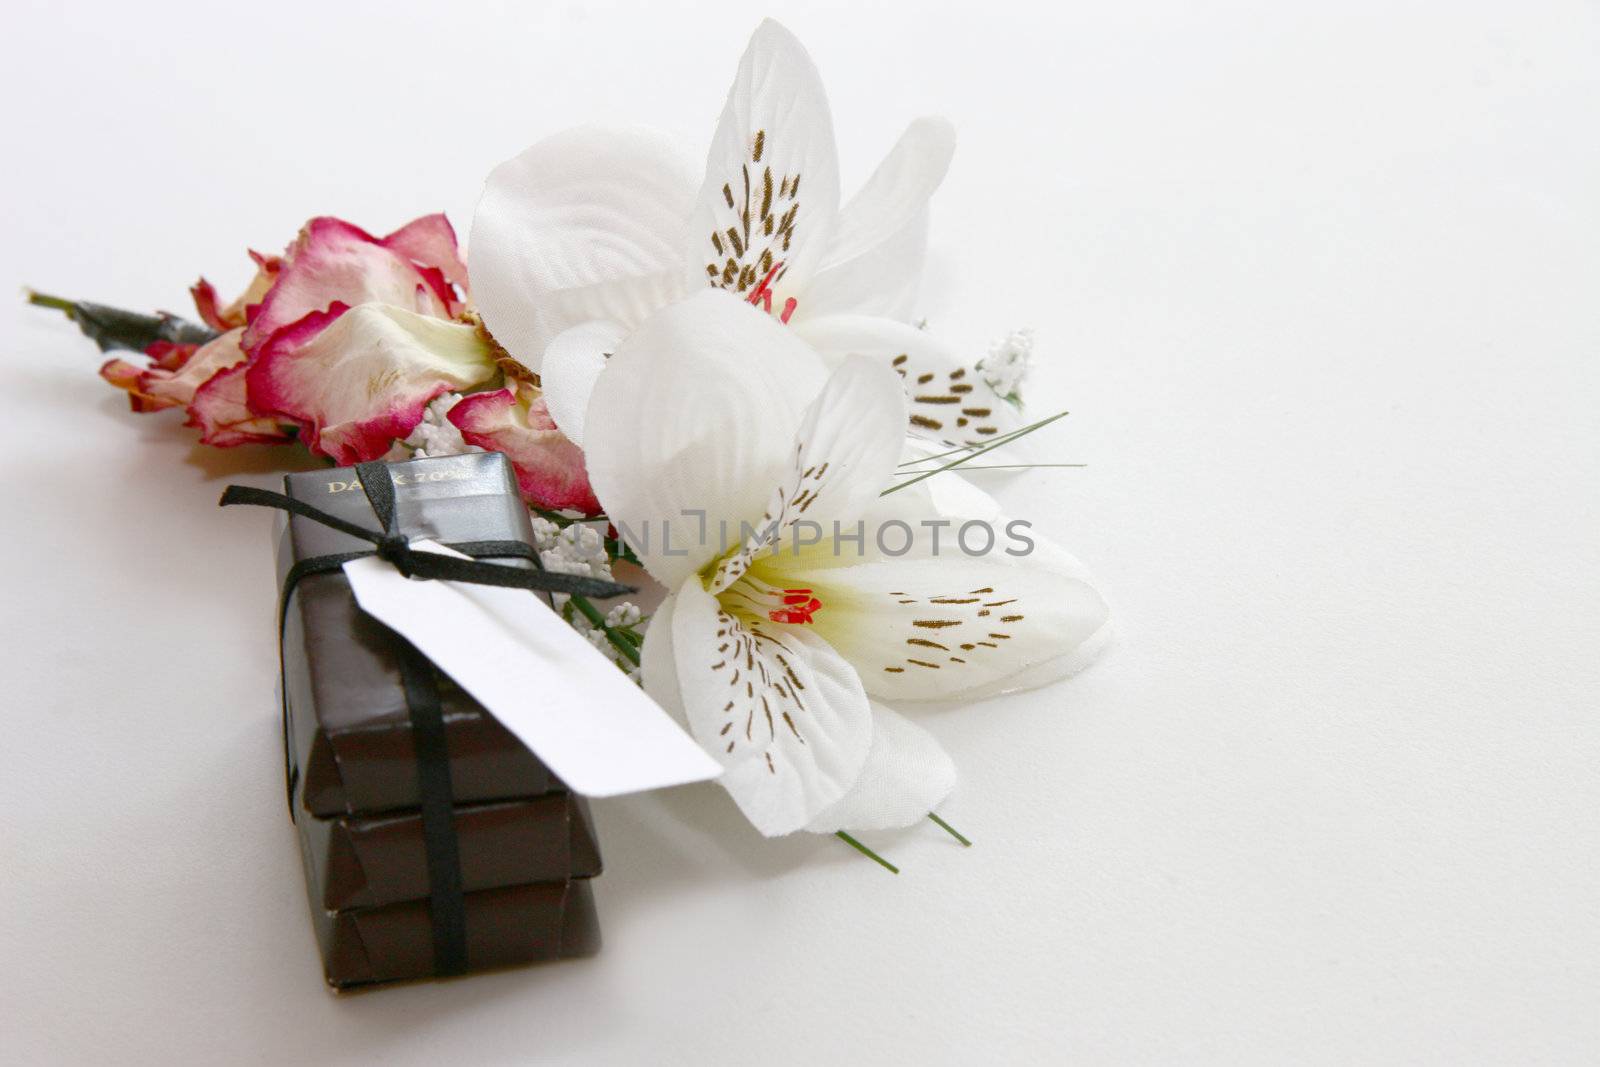 chocs and flowers concept of a gift background